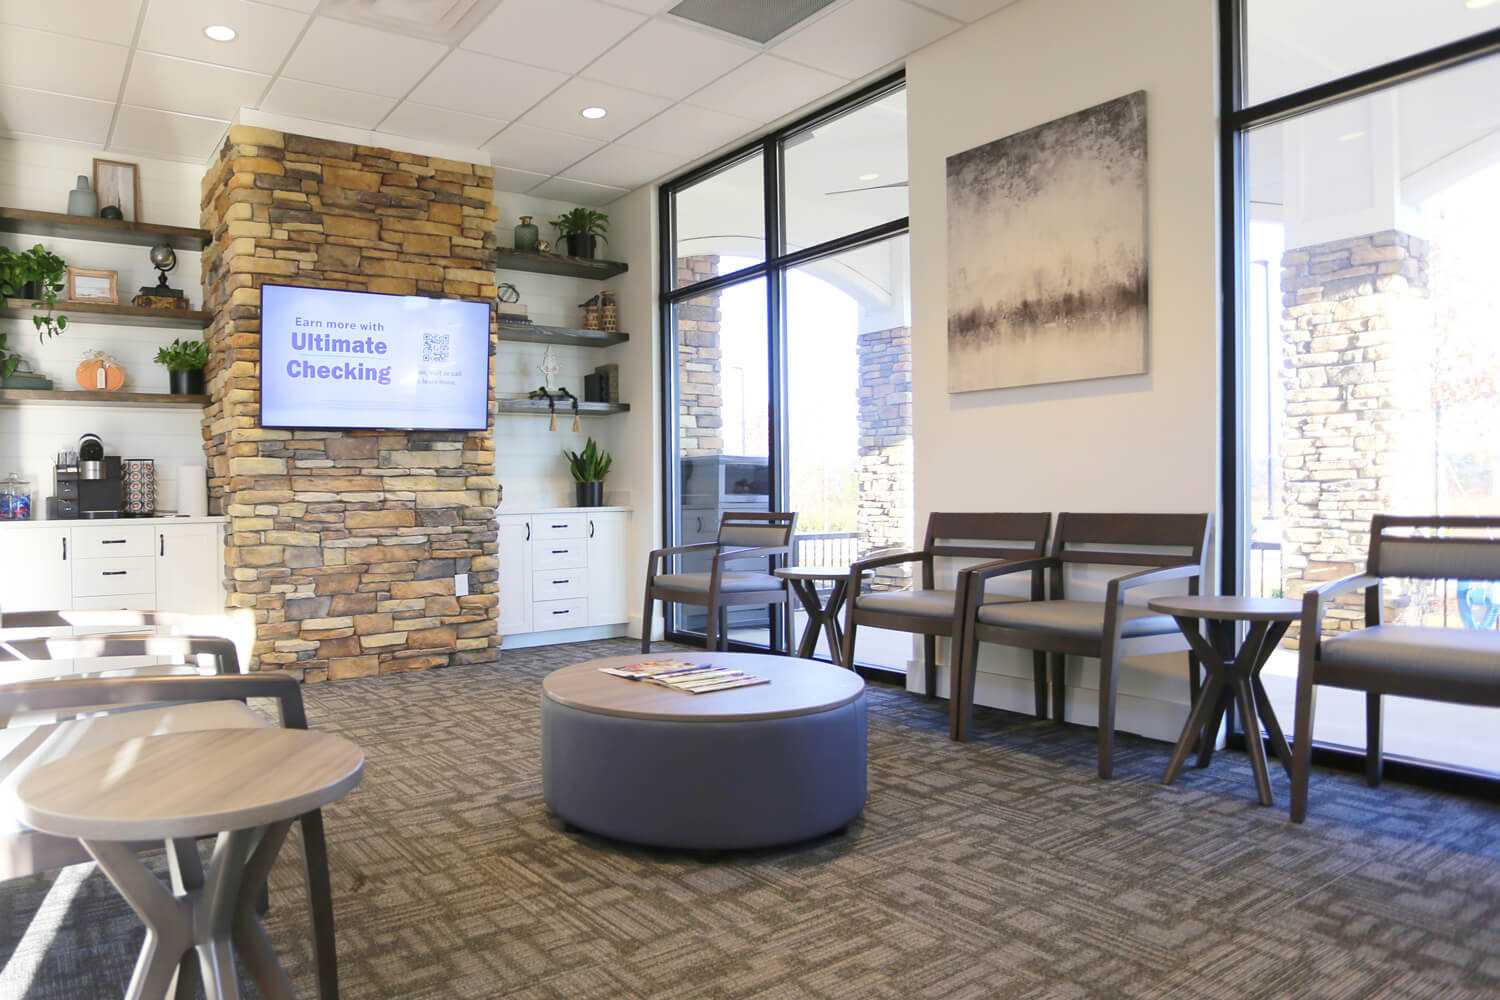 Guardian Credit Union - Wetumpka - Member Lounge - Designed by Foshee Architecture